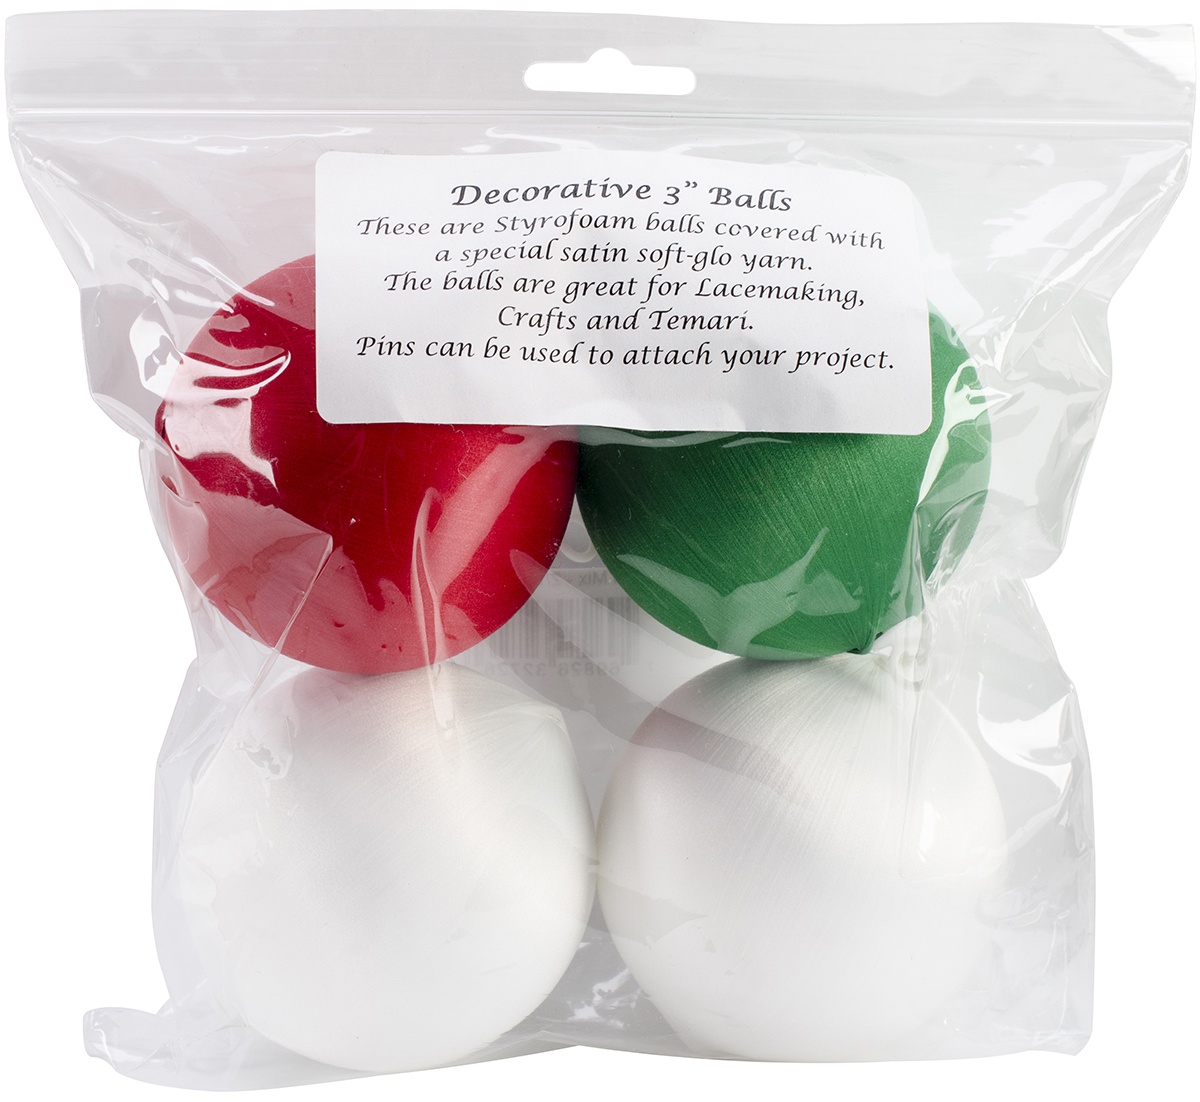 Handy Hands Decor Satin Covered Styrofoam Balls 3" 4 Count, Multipack of 3 - image 2 of 2